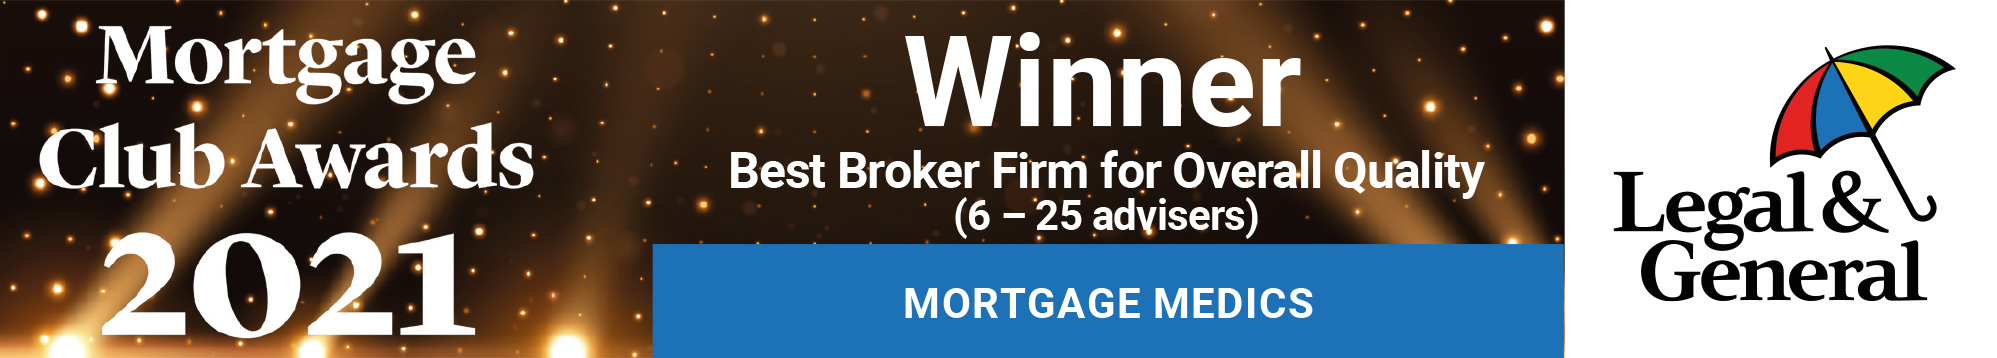 Named ‘Best Broker Firm for Overall Quality (6-25 advisers)’ at the Legal & General Mortgage Club Awards